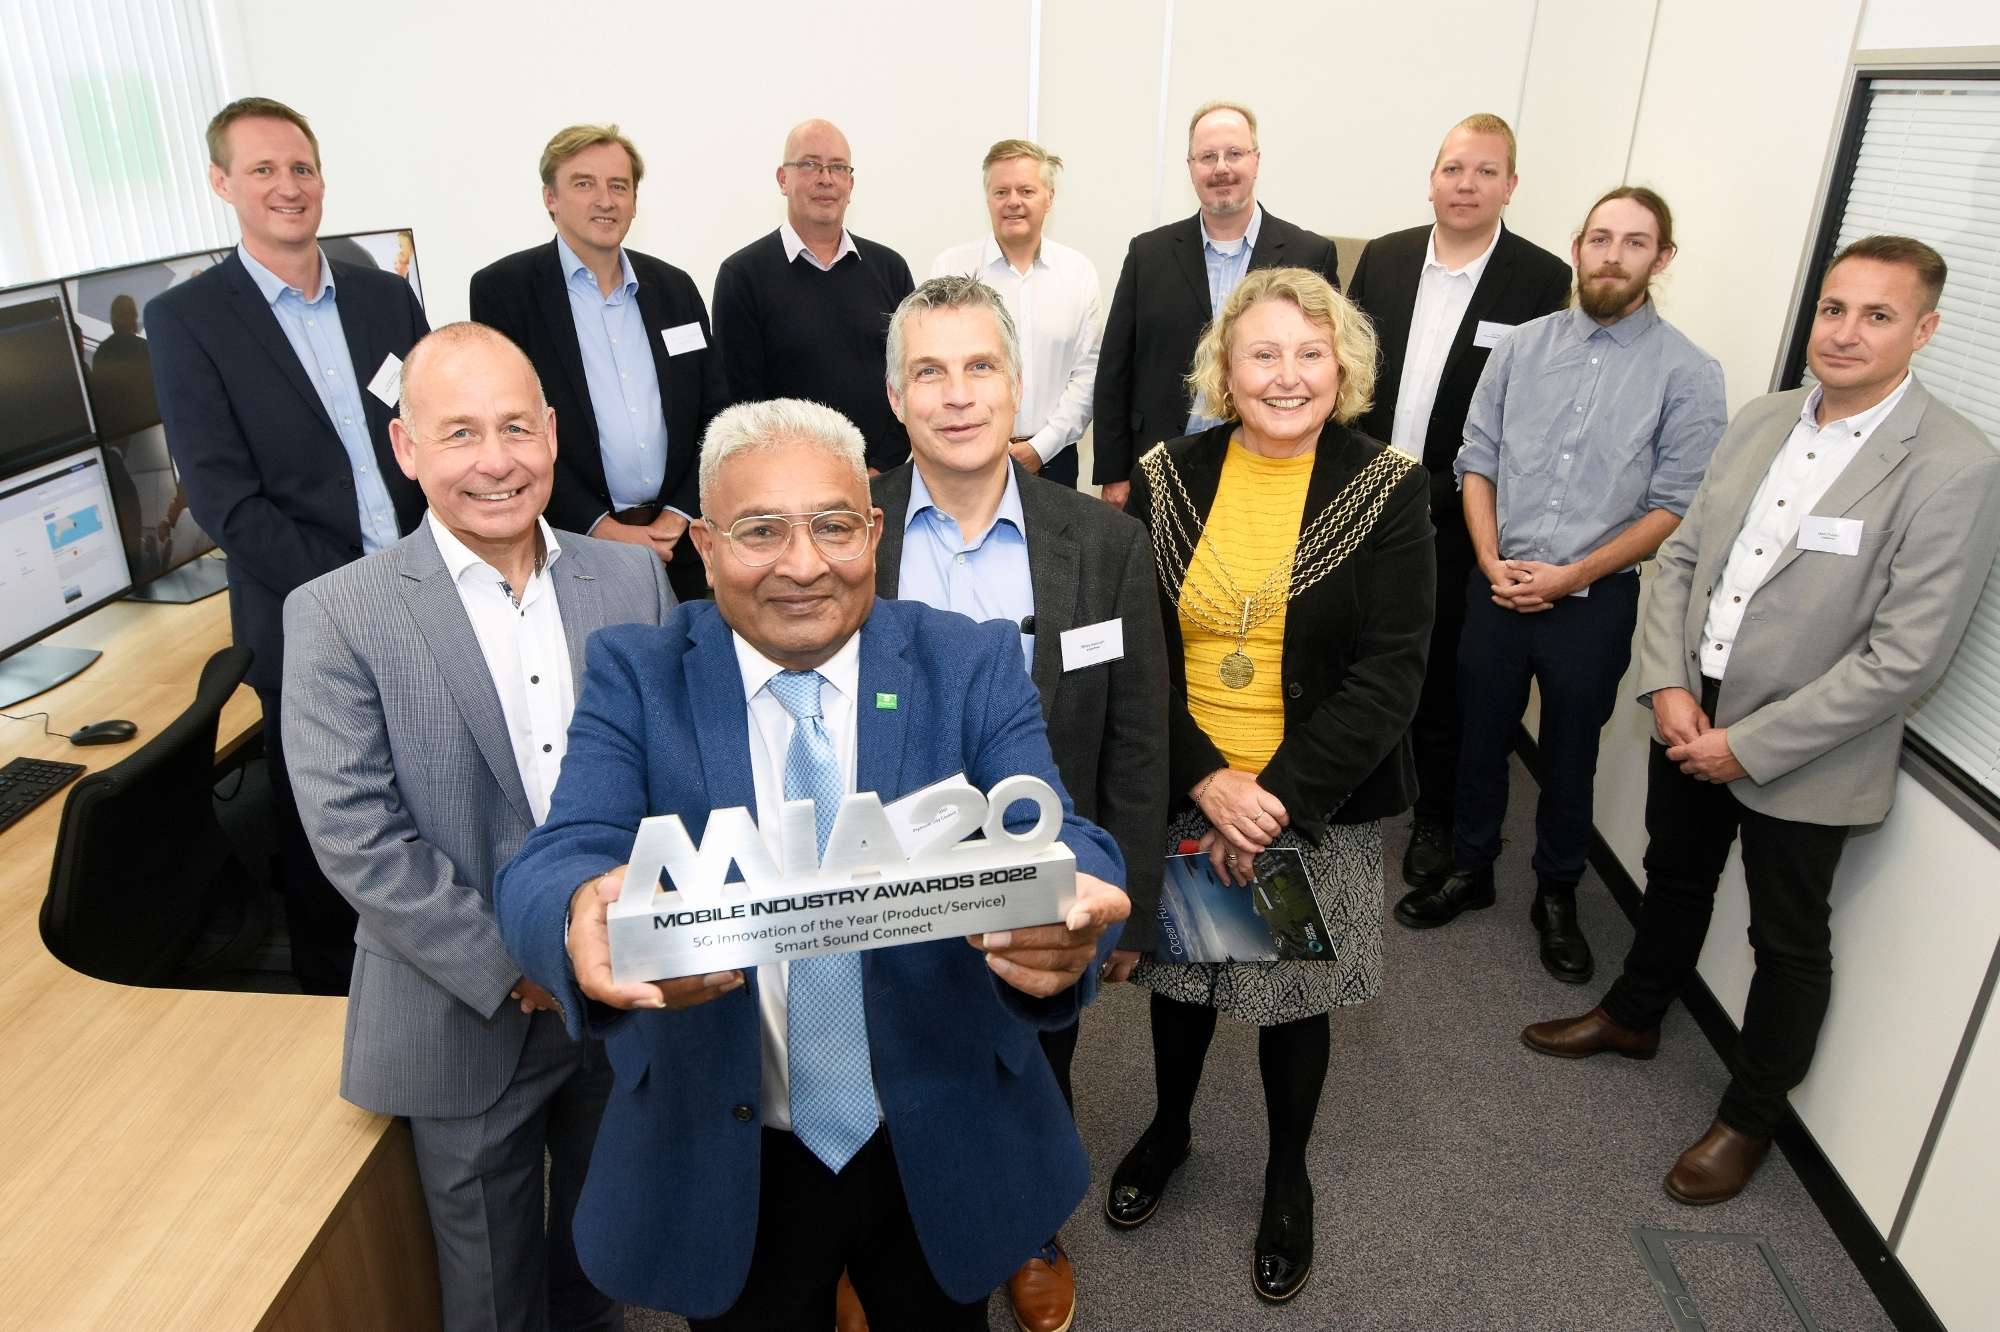 Invitees at the opening with Councillor Pat Patel holding the recent Mobile Industry award given to Smart Sound Connect for 5G innovation of the Year